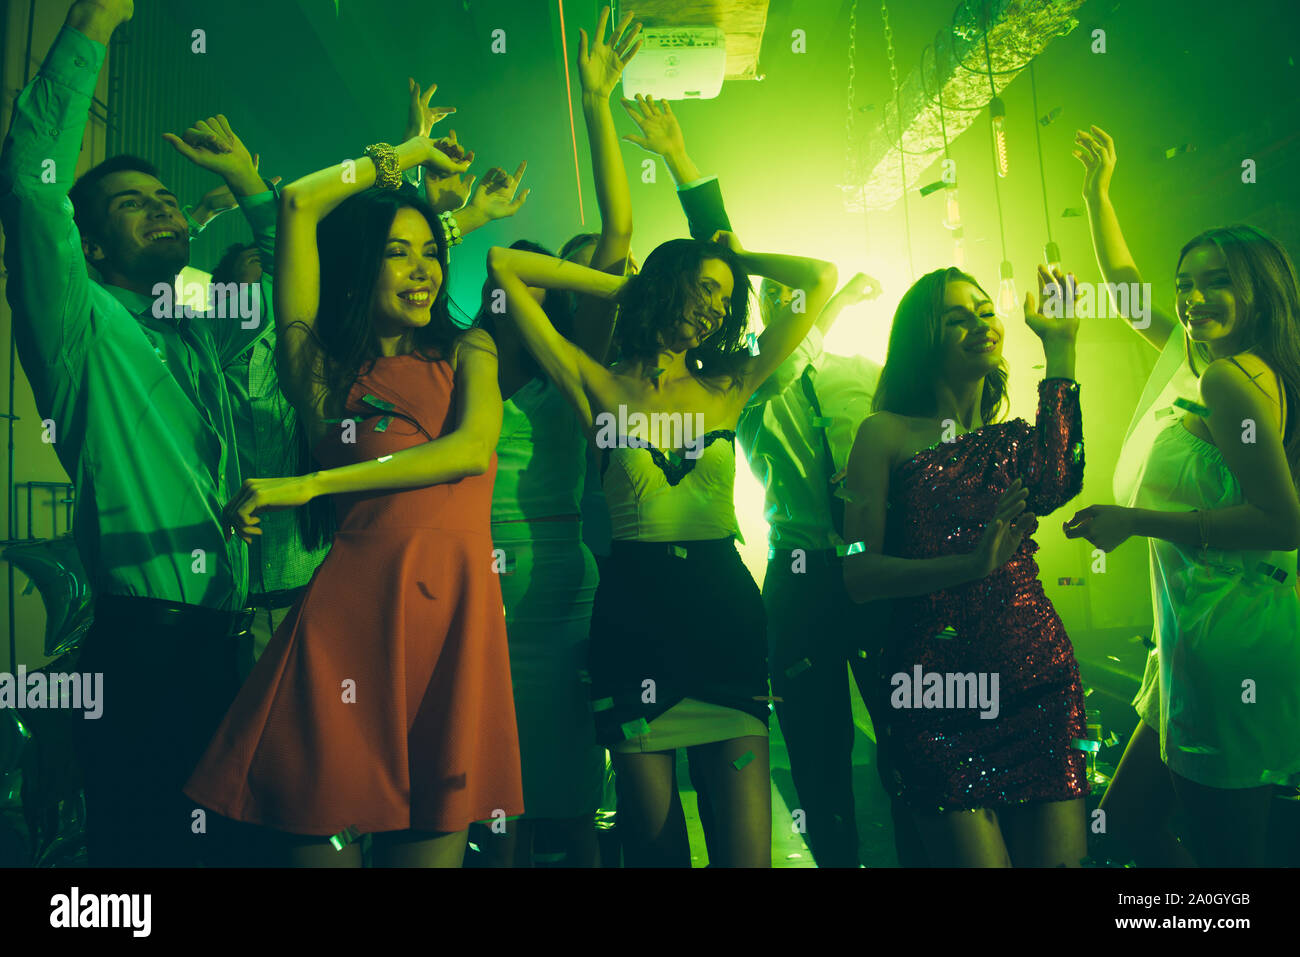 Rest relax chill concept. People dancing in party club with neon lights,  ladies close eyes and raised hands up, mans stand on background Stock Photo  - Alamy